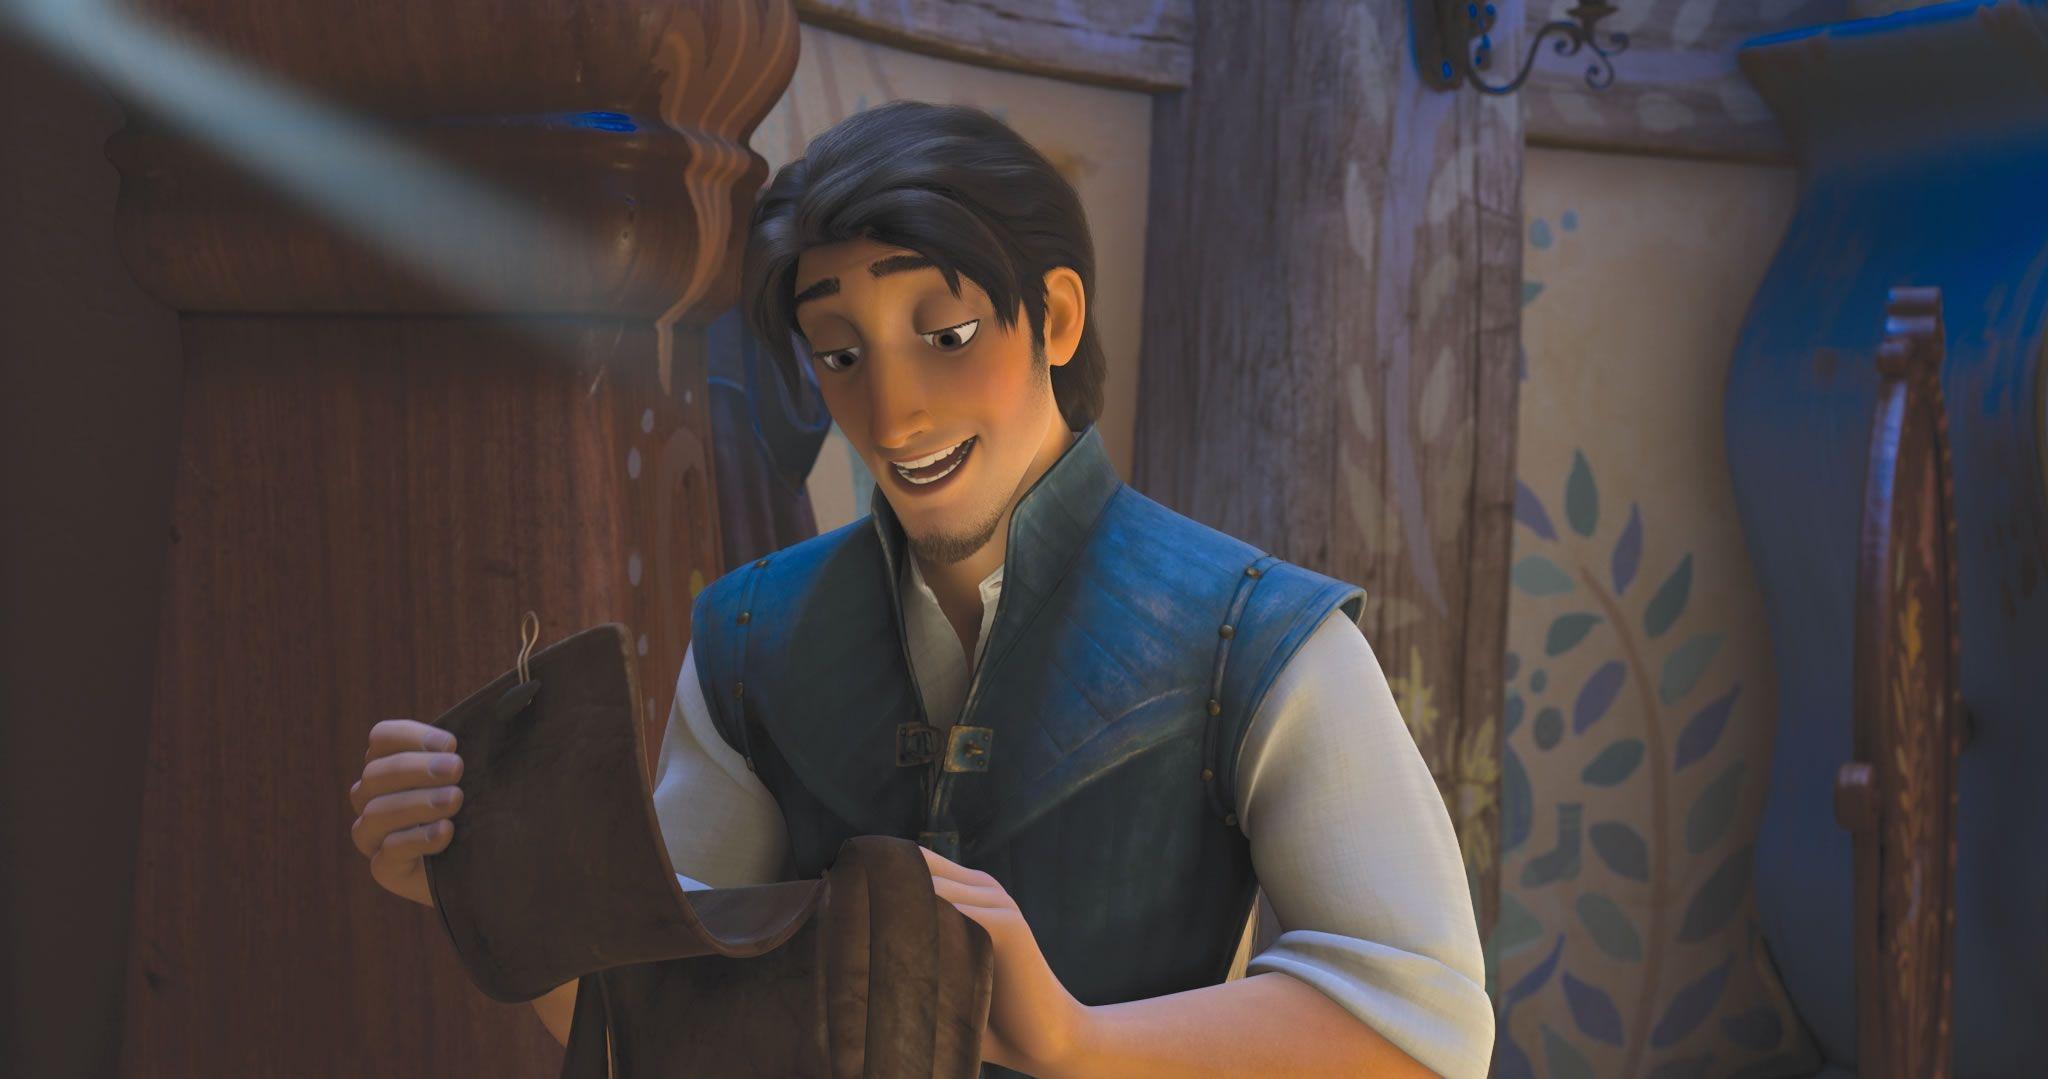 Flynn Rider from Tangled - wide 1